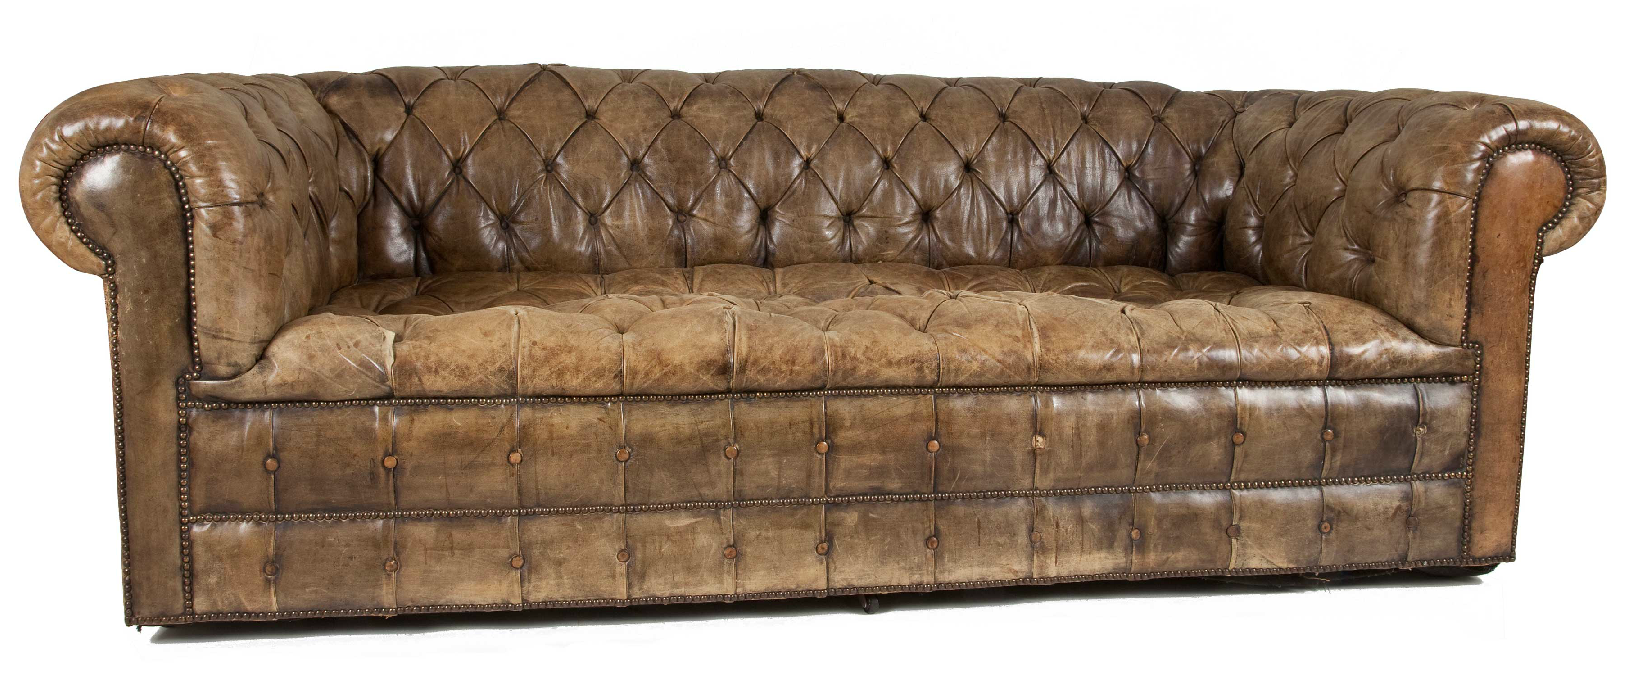 GARNERS ANTIQUES Antique Distressed Chesterfield Sofa For Sale UK